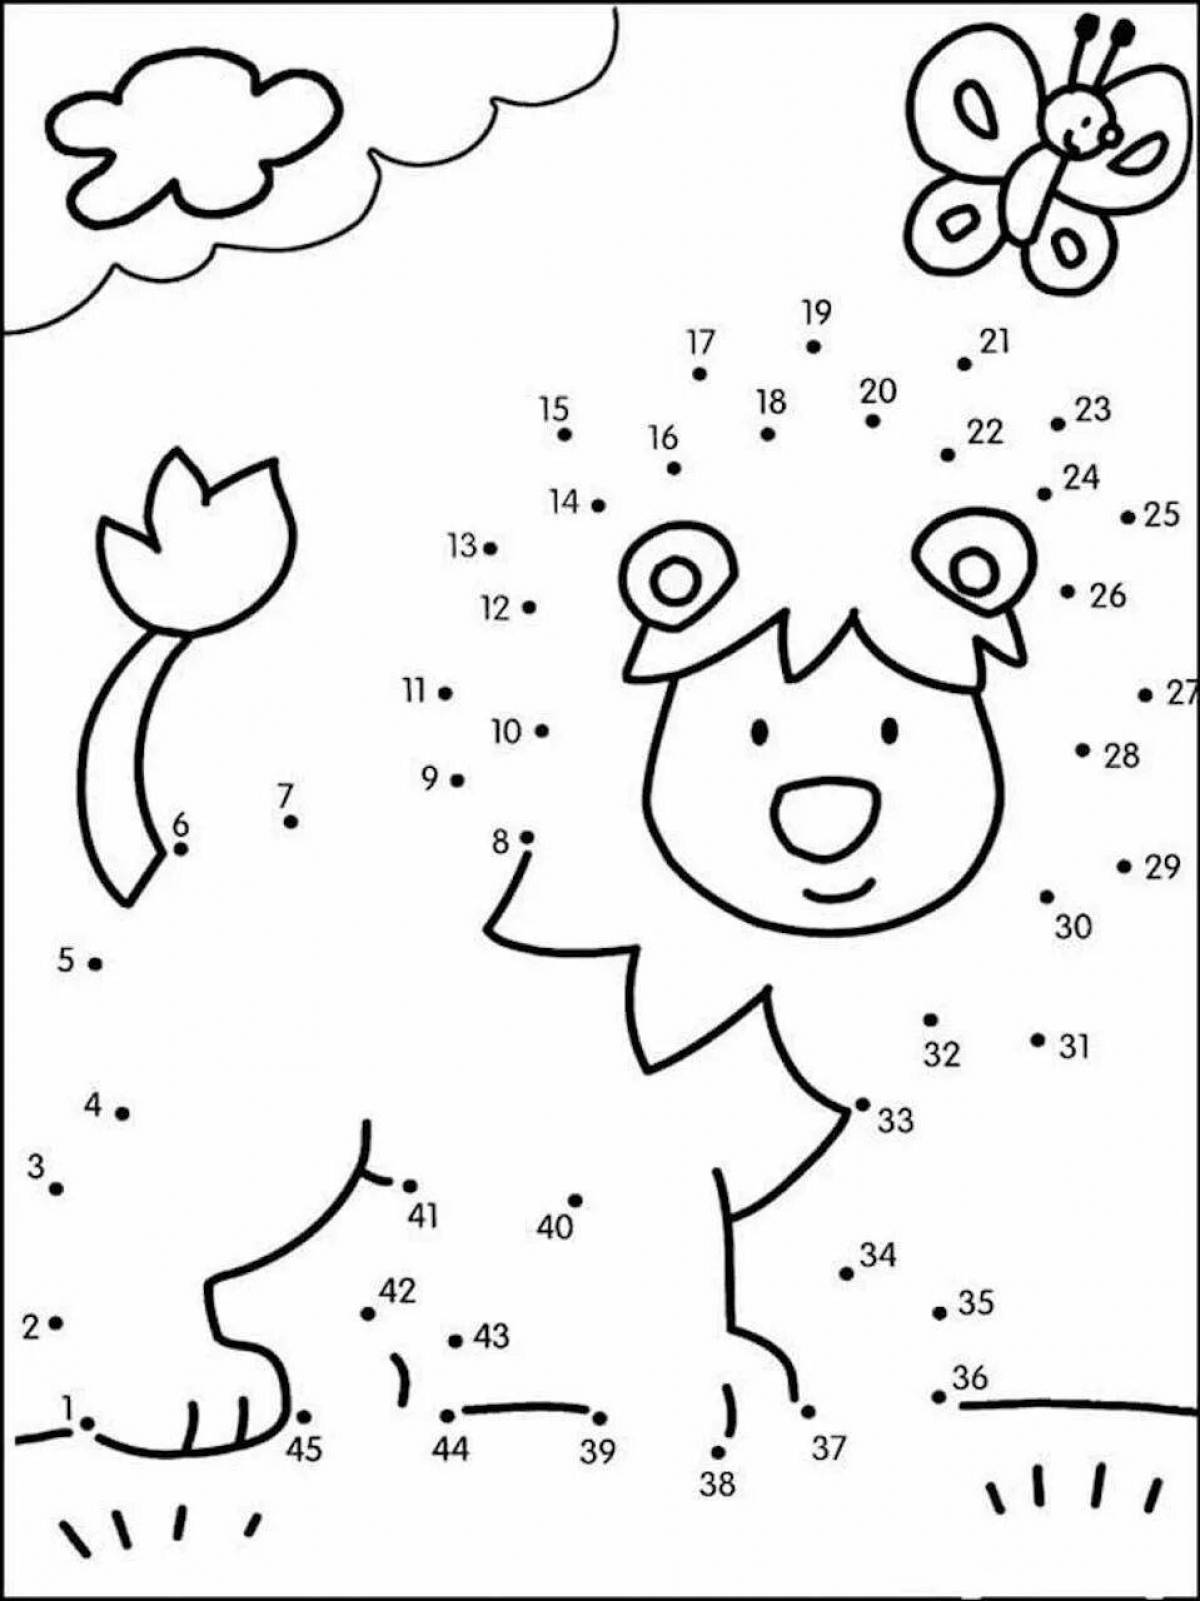 Colored math coloring book for grade 1 with dots